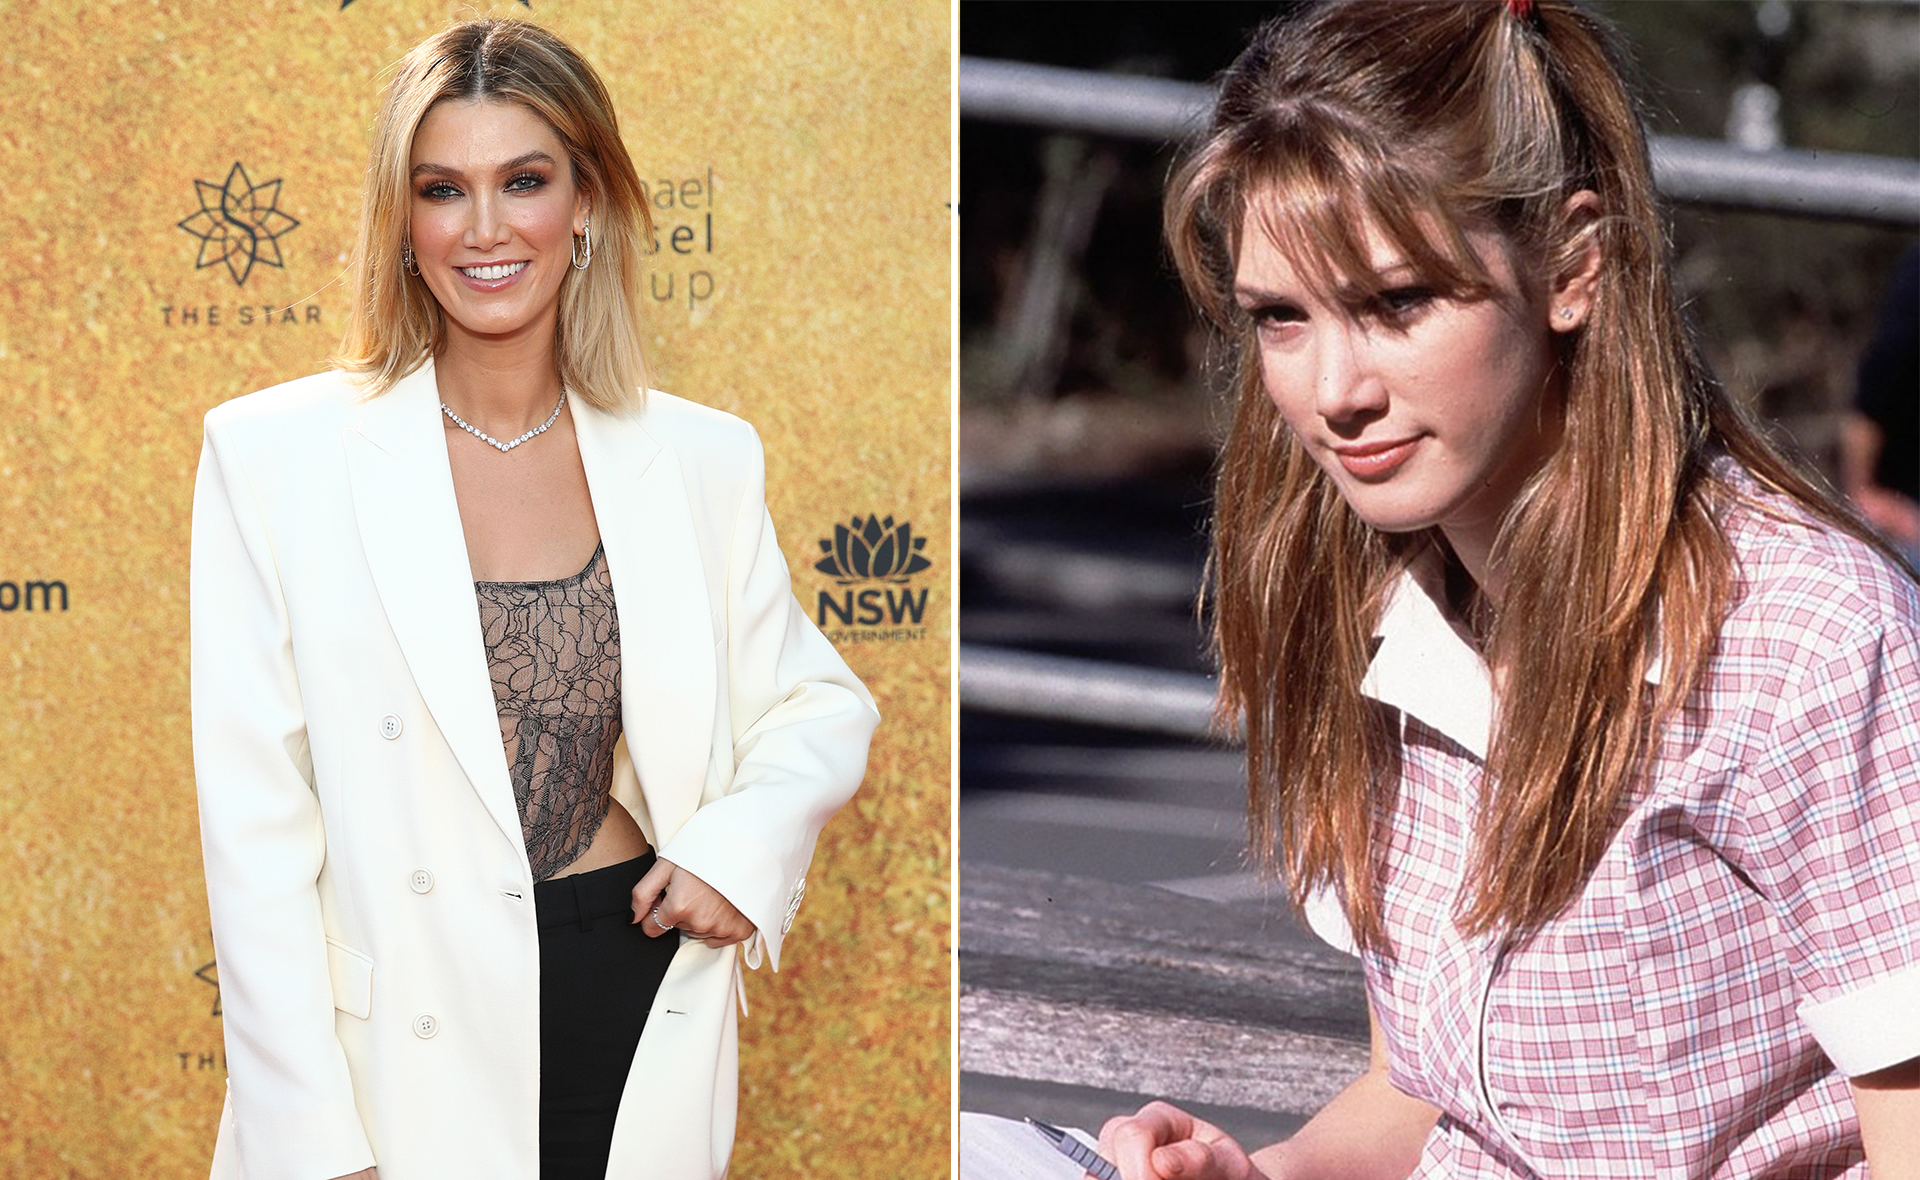 “It truly is the end of an era”: Delta Goodrem shares her heartbreak over Neighbours’ cancellation